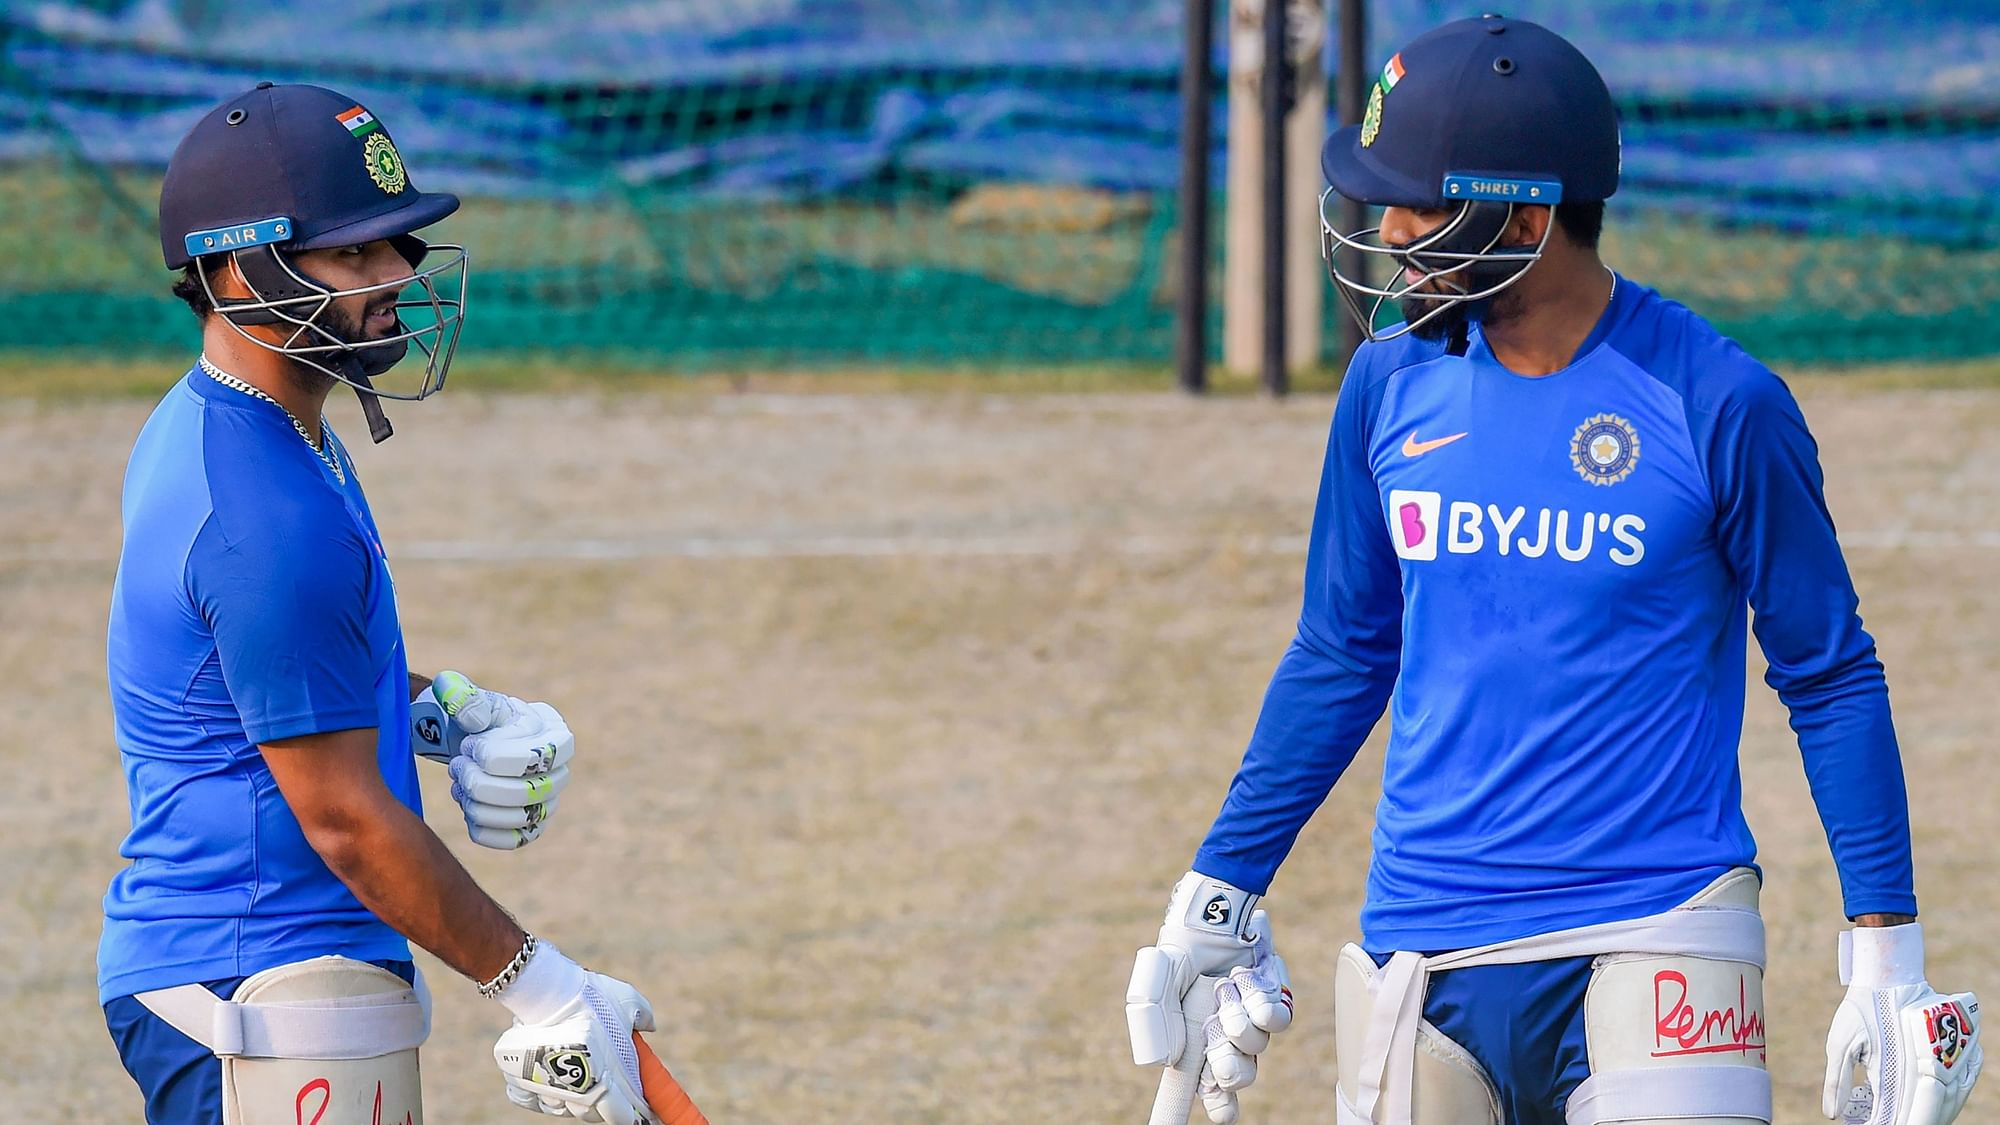 Indian cricketer Rishabh Pant and KL Rahul during a practice session.